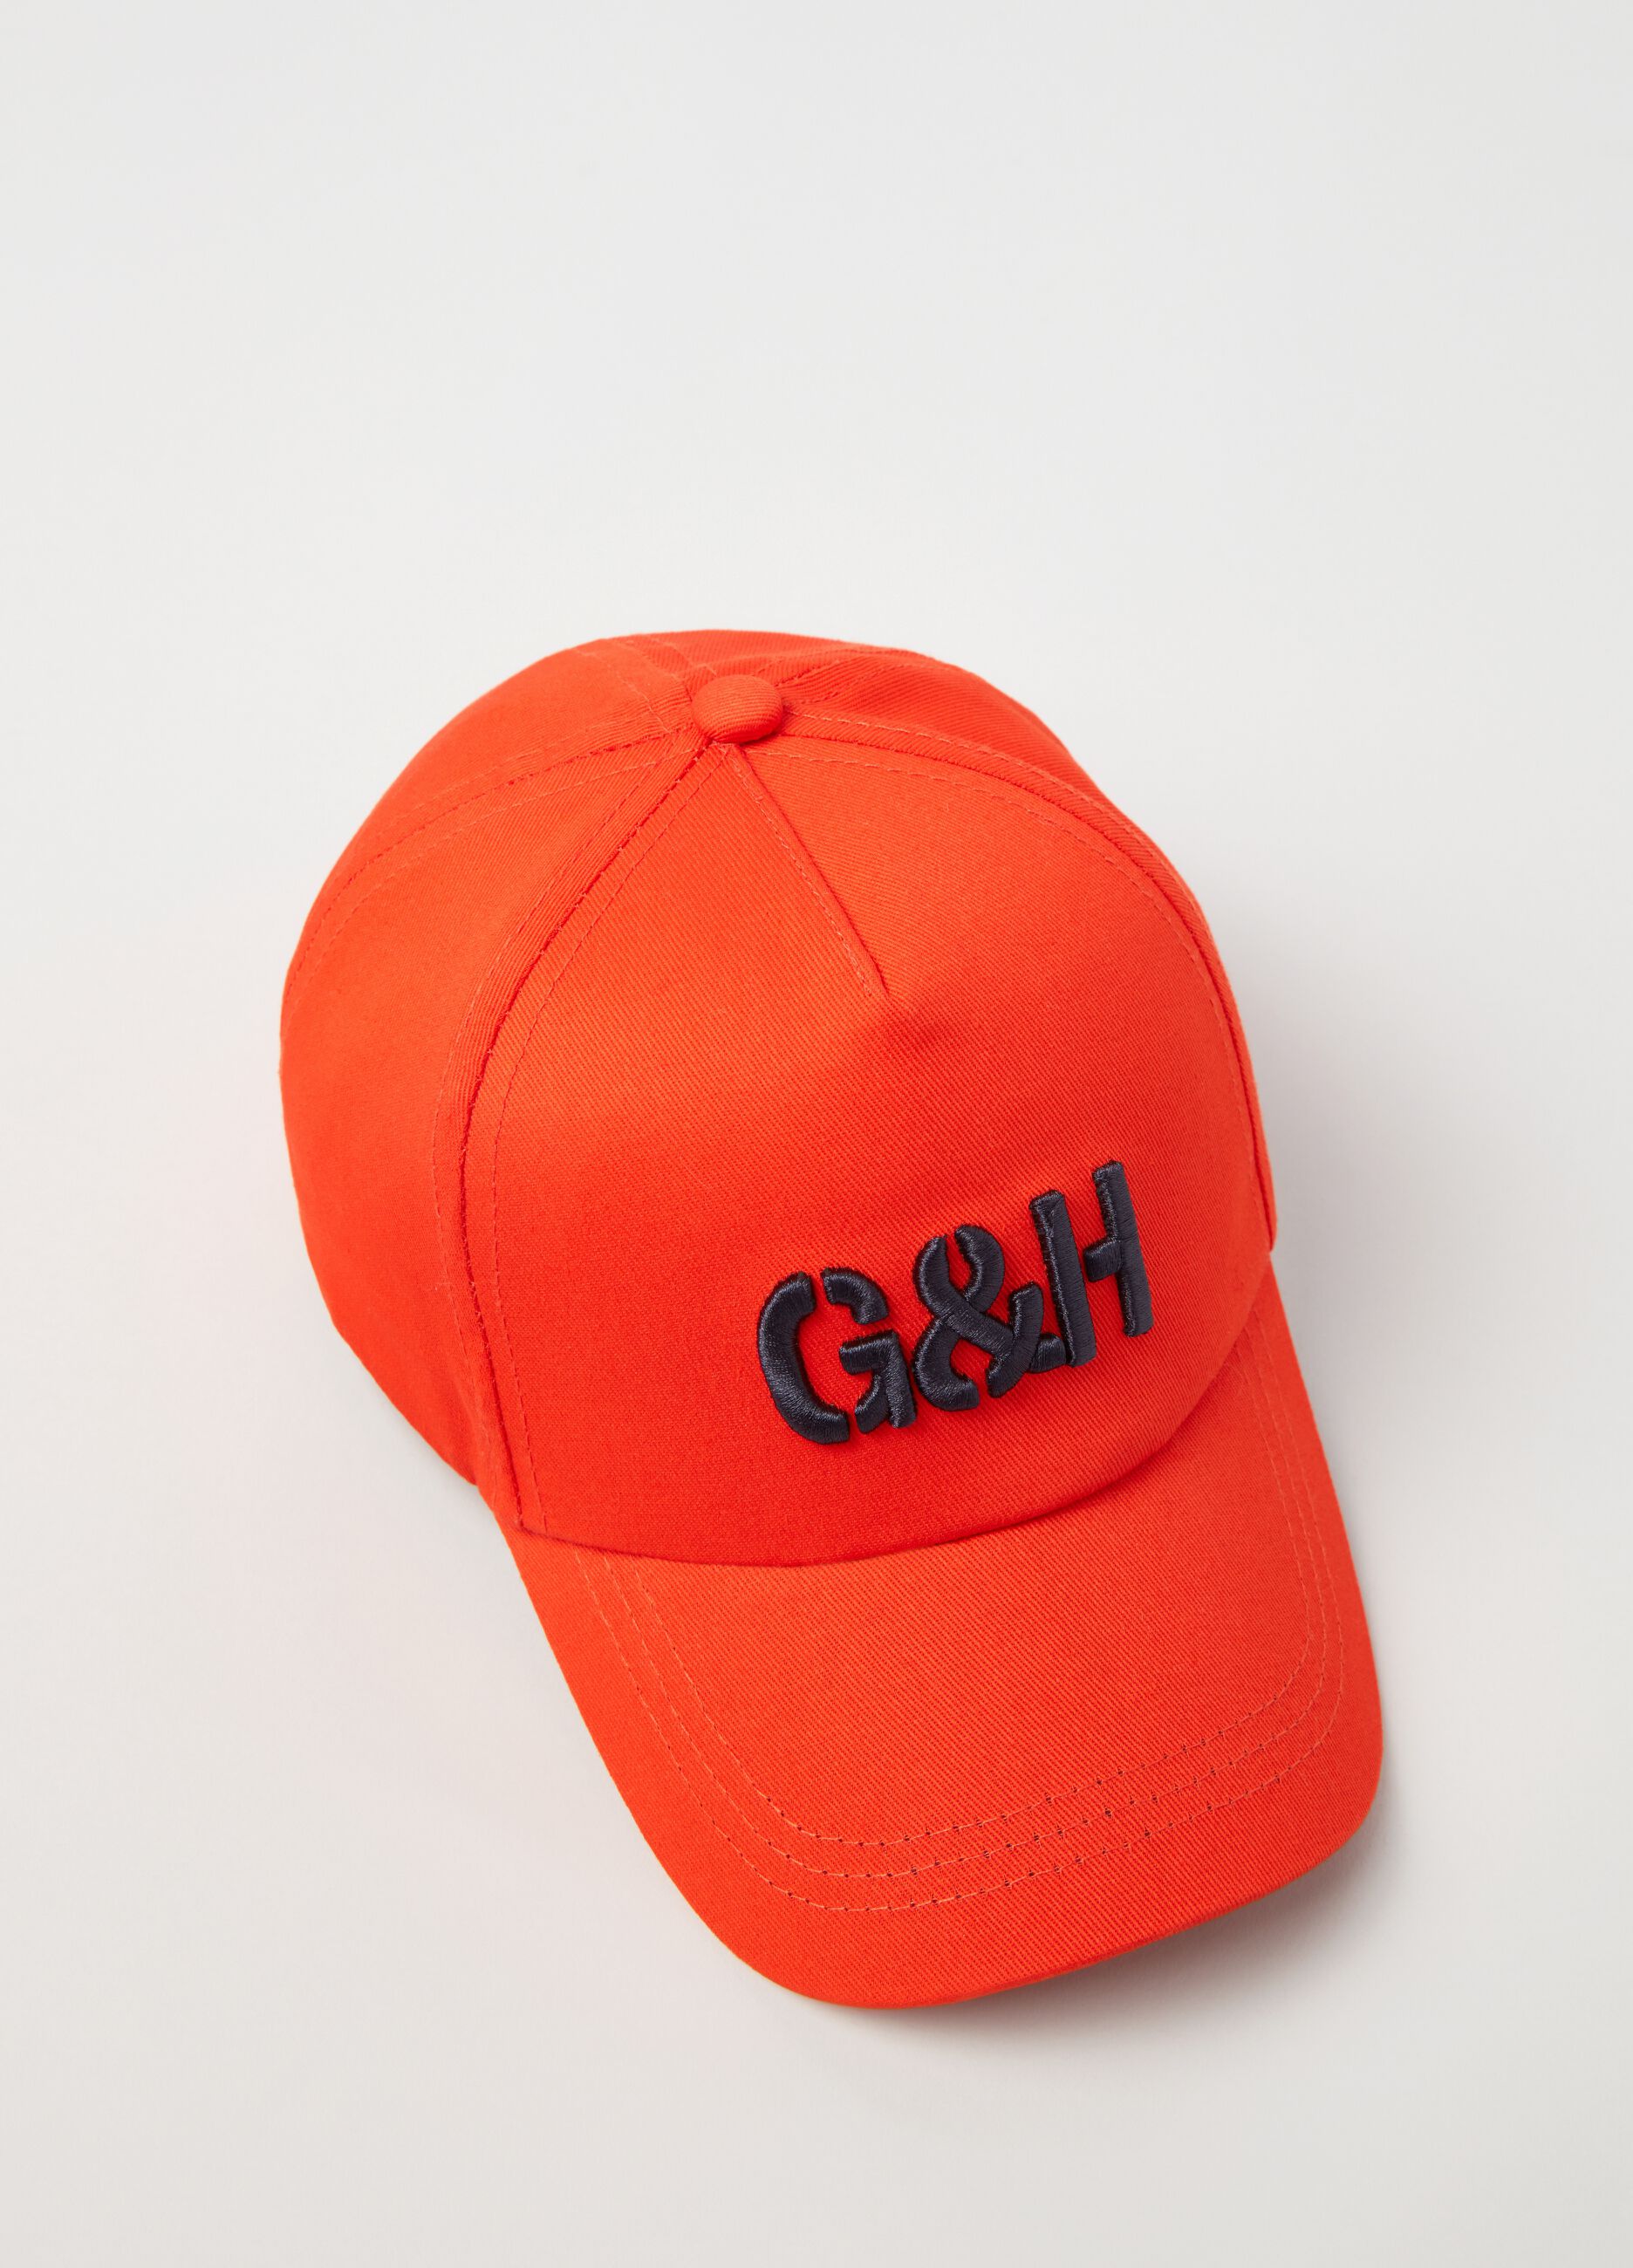 Baseball cap with embroidered logo.